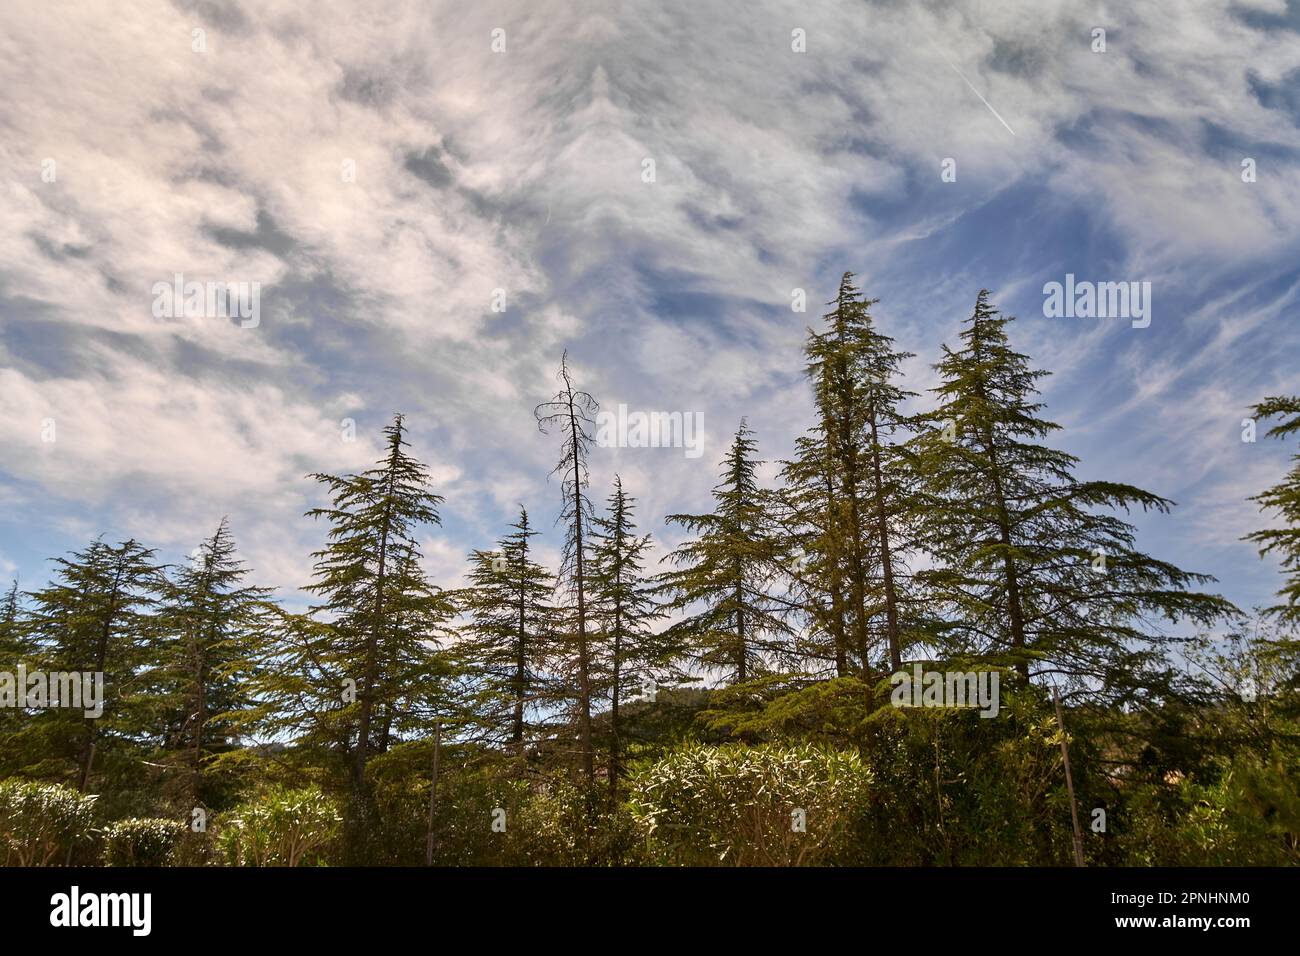 Cedrus tree with few leaves under a radiant blue sky. Stock Photo